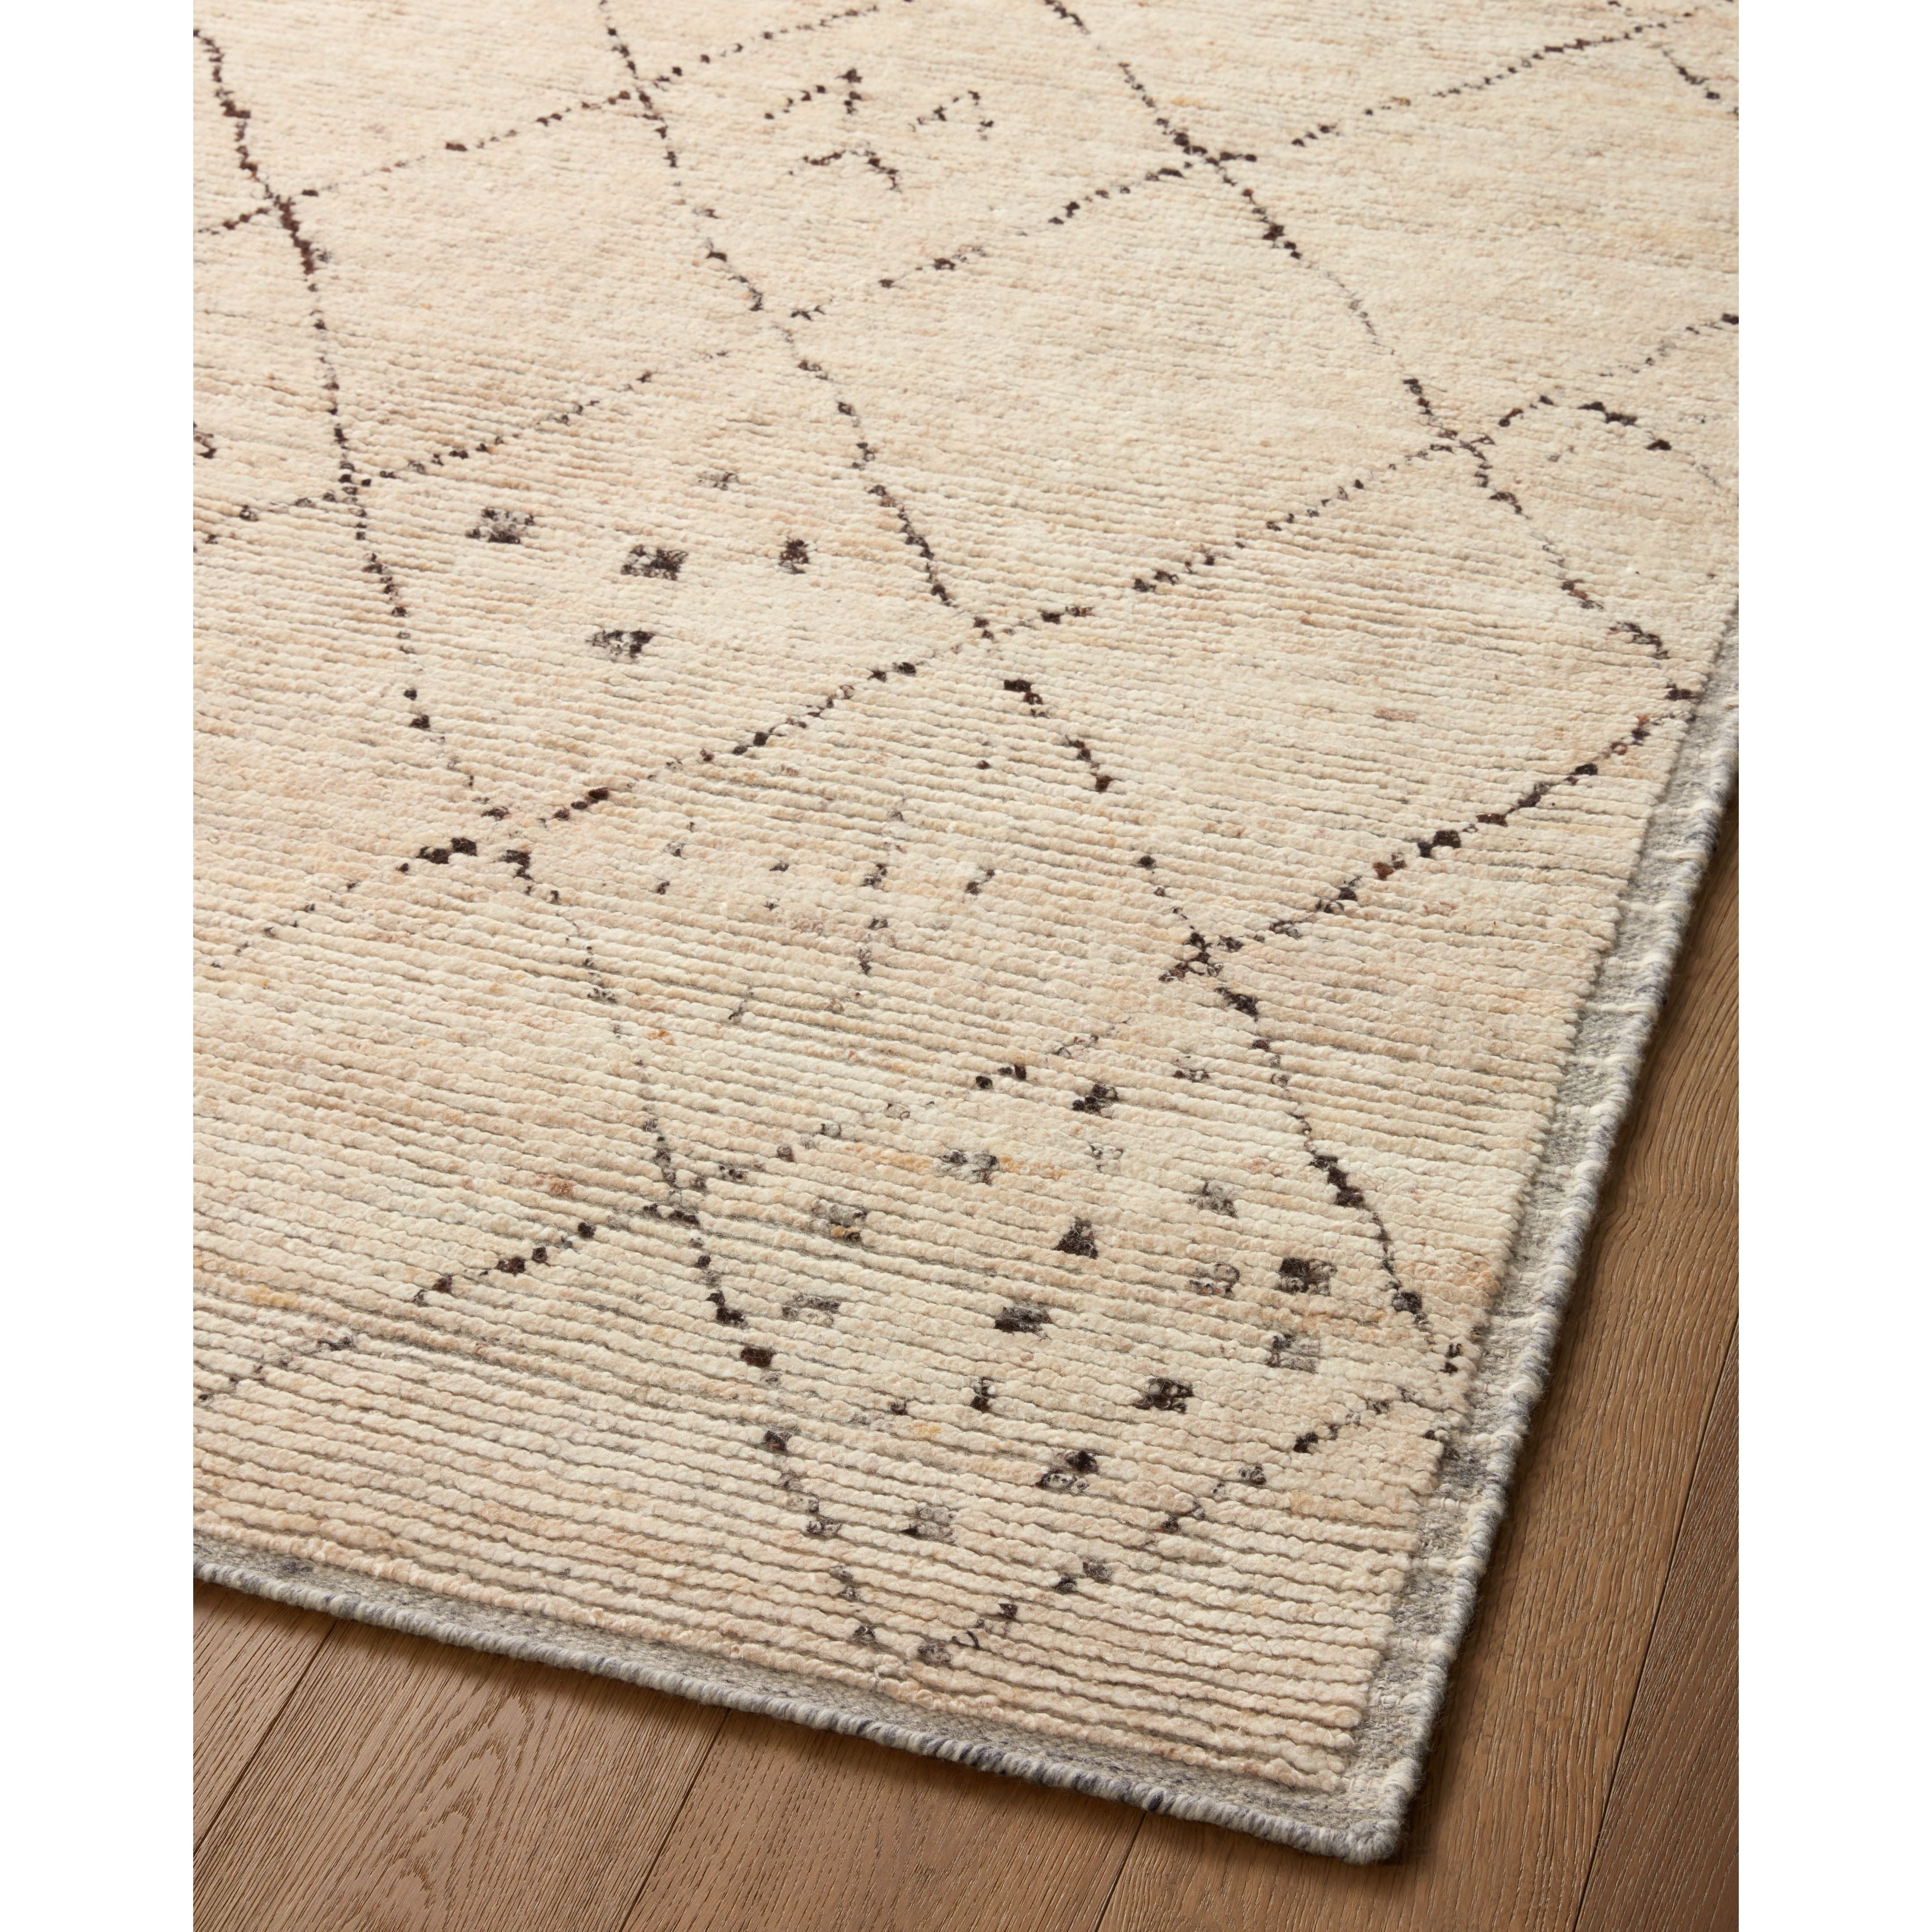 Amber Lewis x Loloi Briyana Natural / Stone Rug combines the incredible ribbed texture of Moroccan rugs with clean, contemporary design, thanks to Lewis’s careful eye for details. Amethyst Home provides interior design services, furniture, rugs, and lighting in the Kansas City metro area.